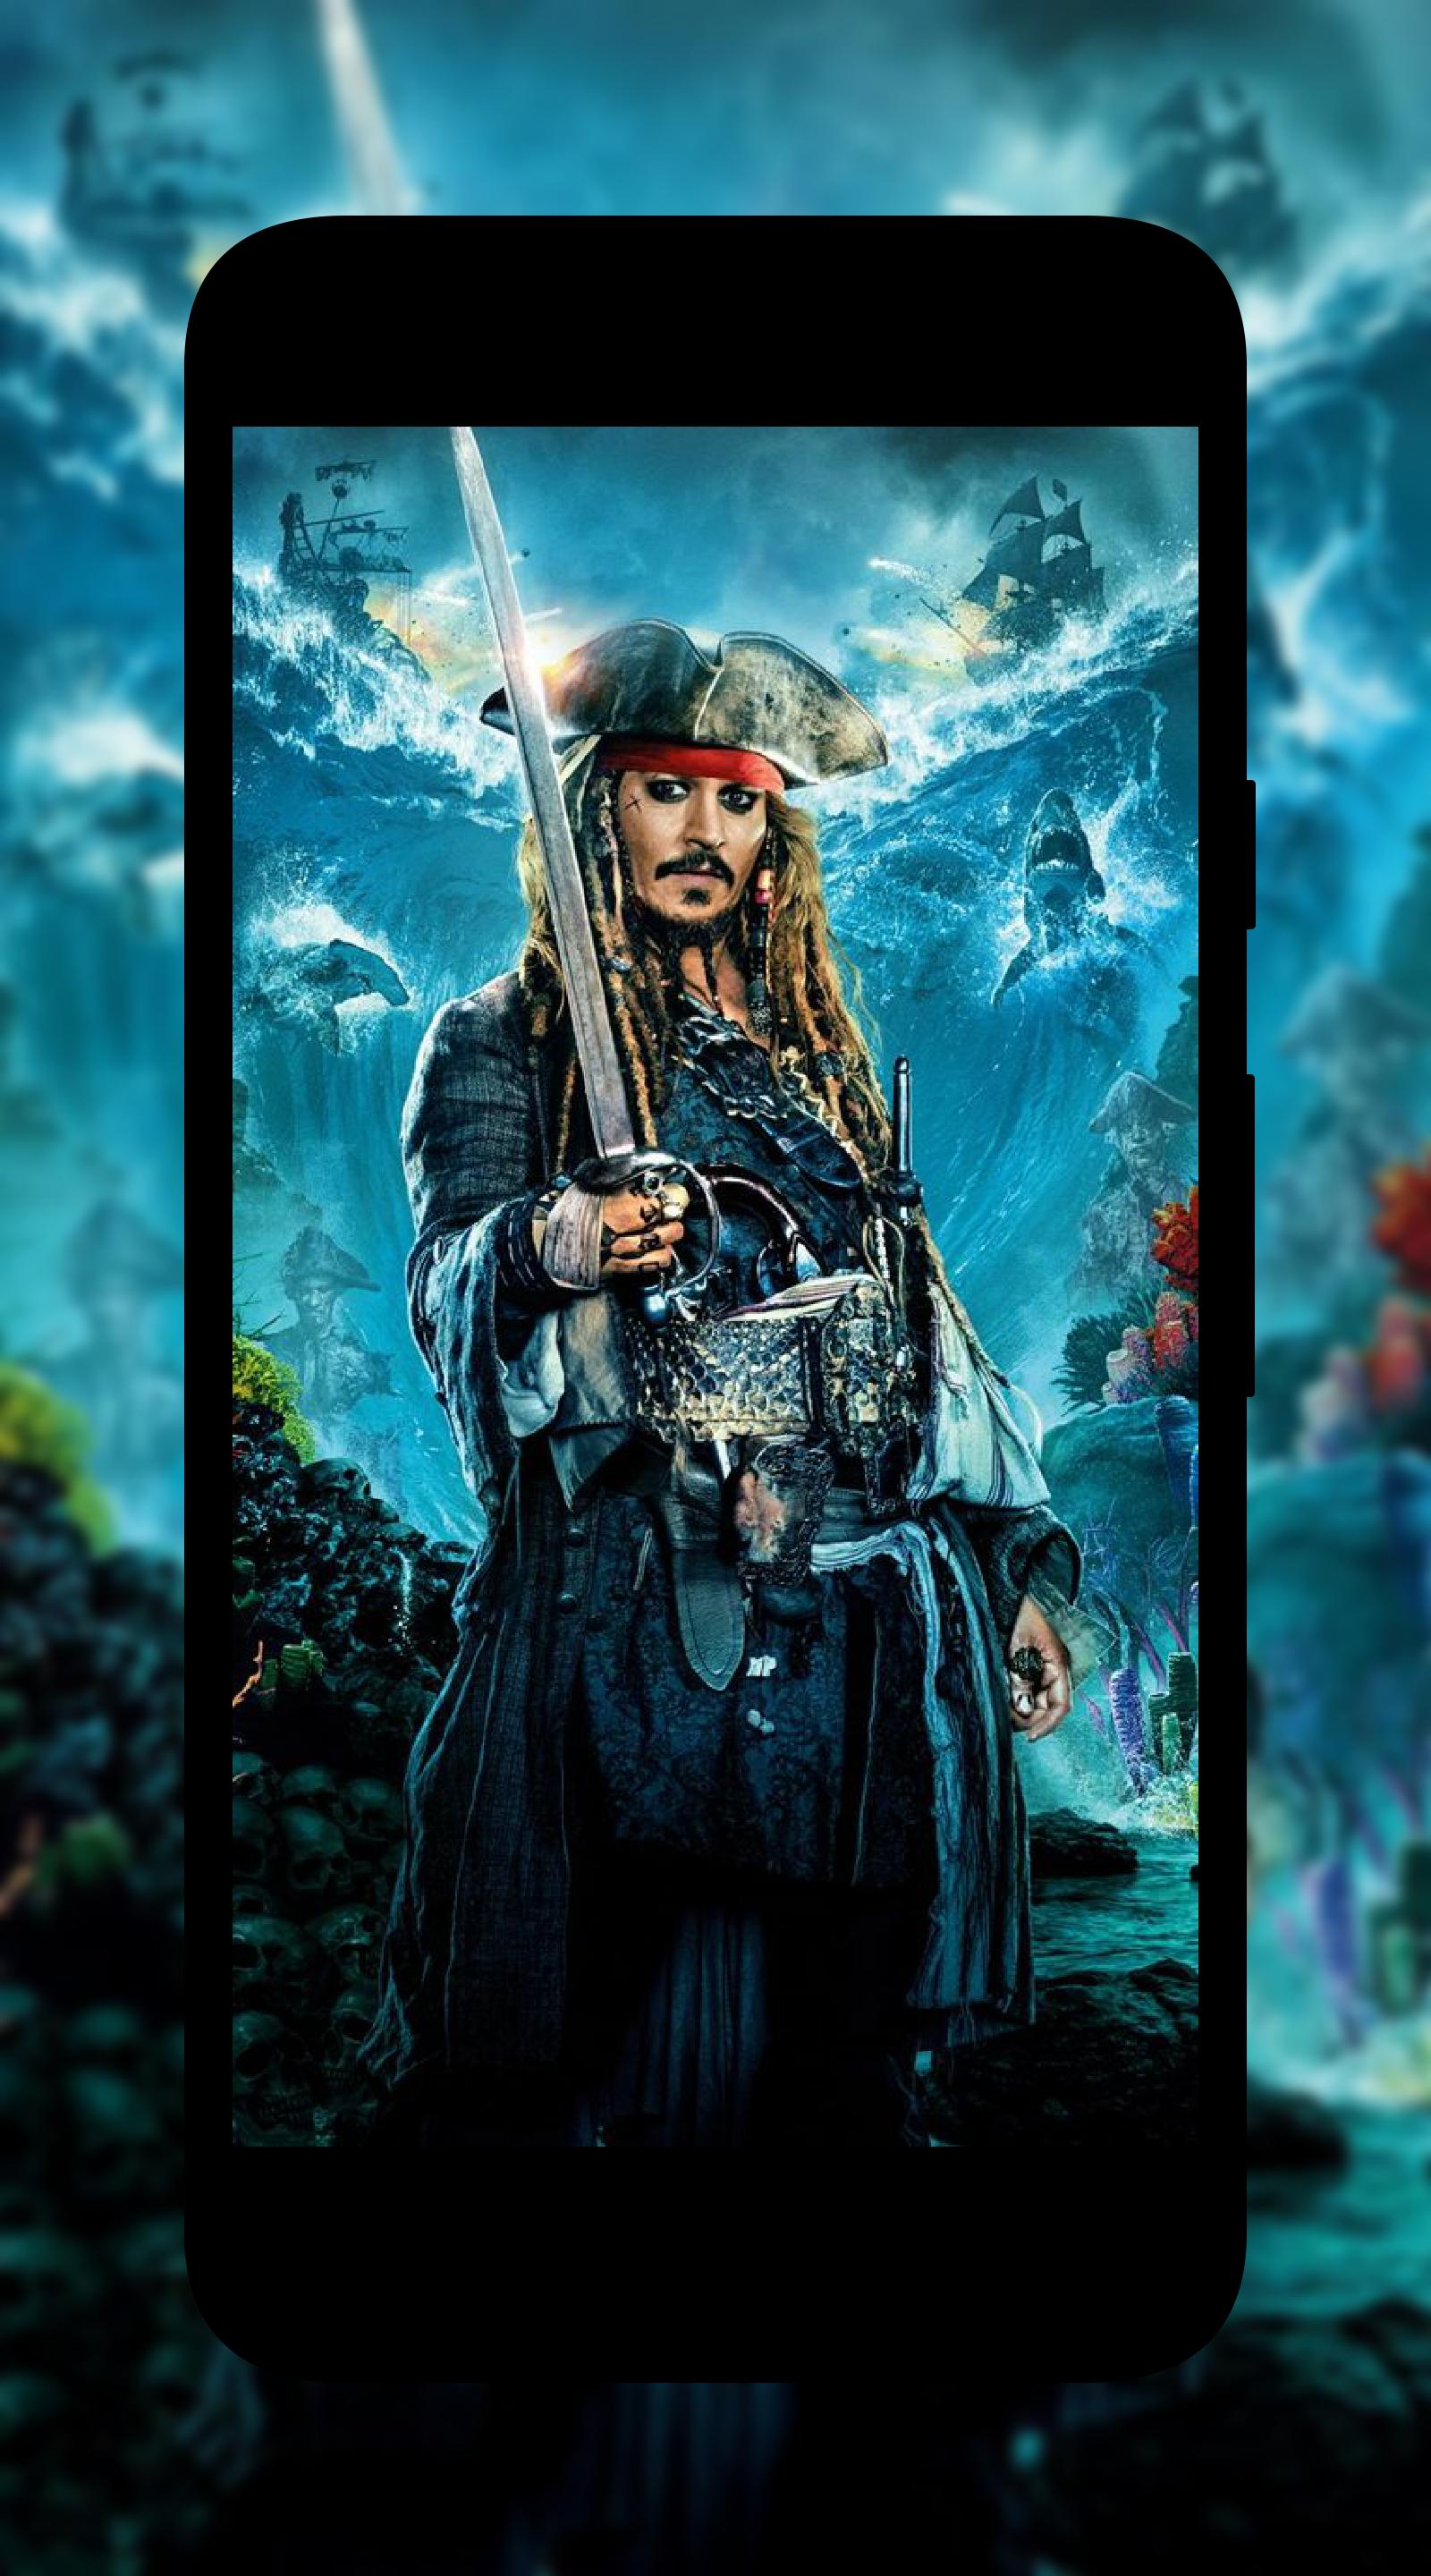 Jack Sparrow Wallpaper for Android - APK Download